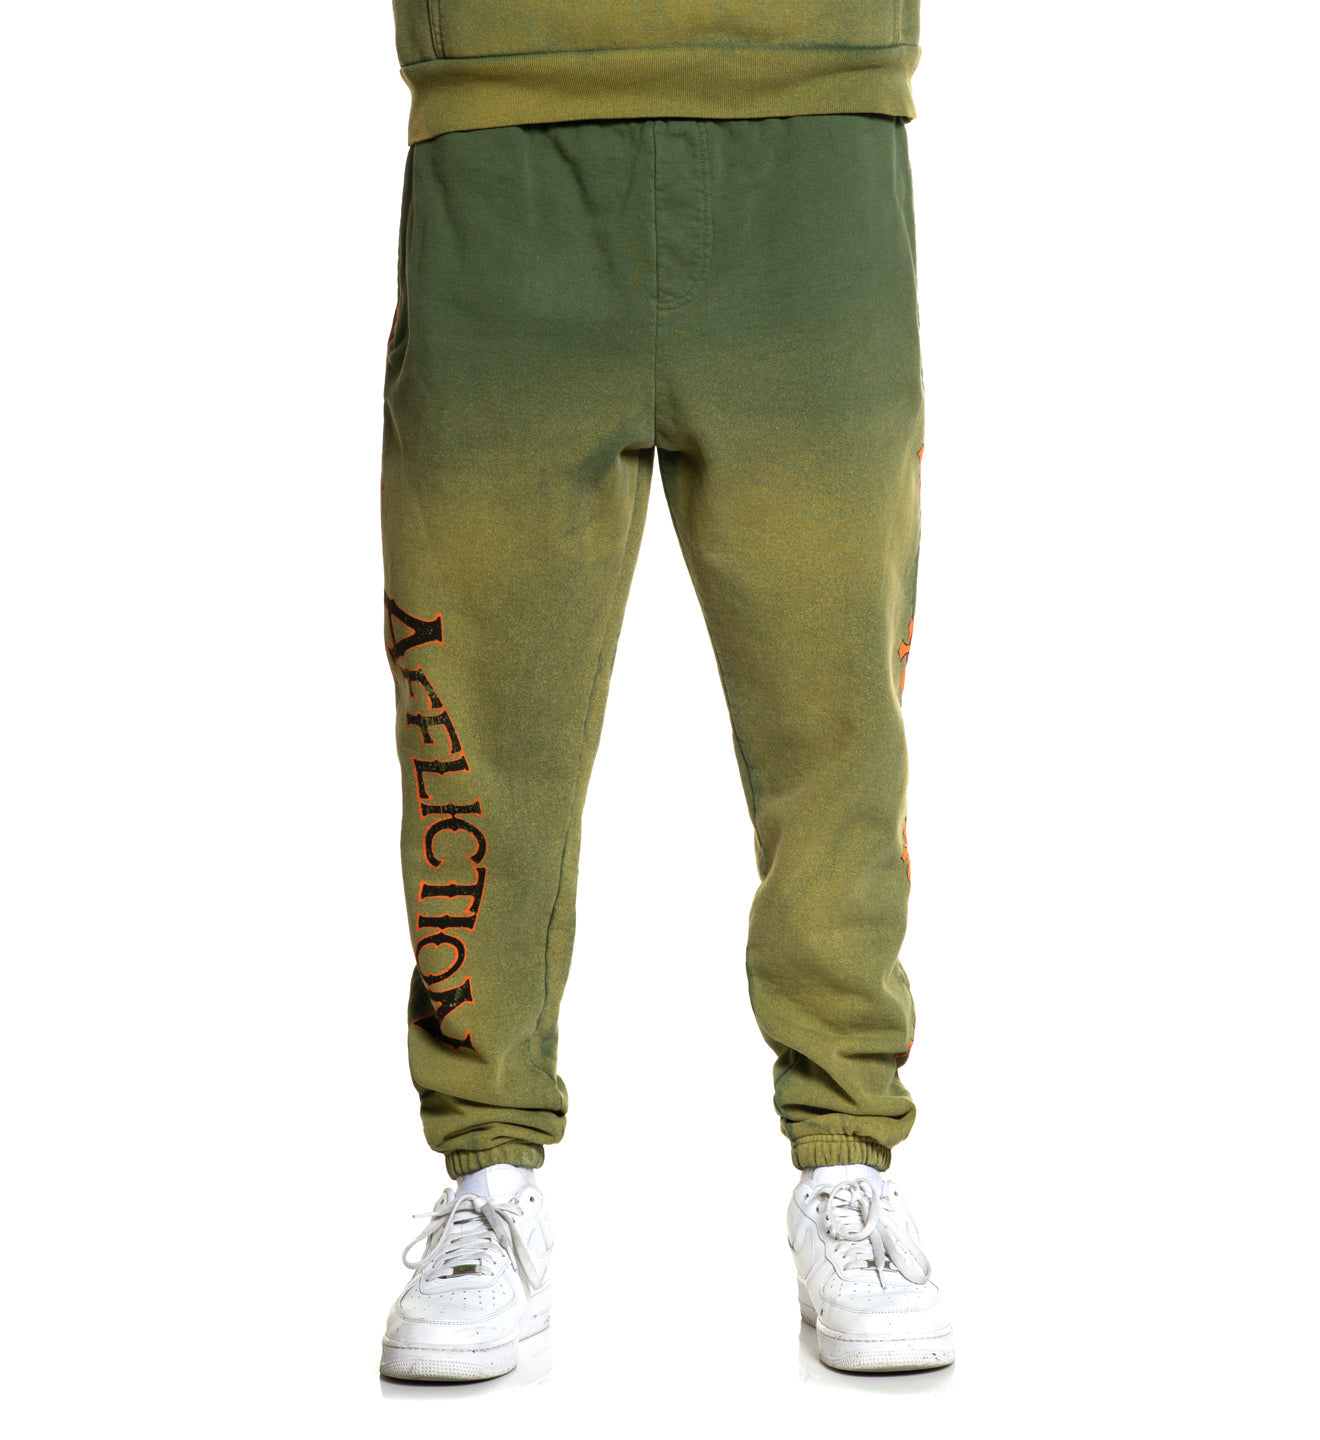 Absolution Sweatpant